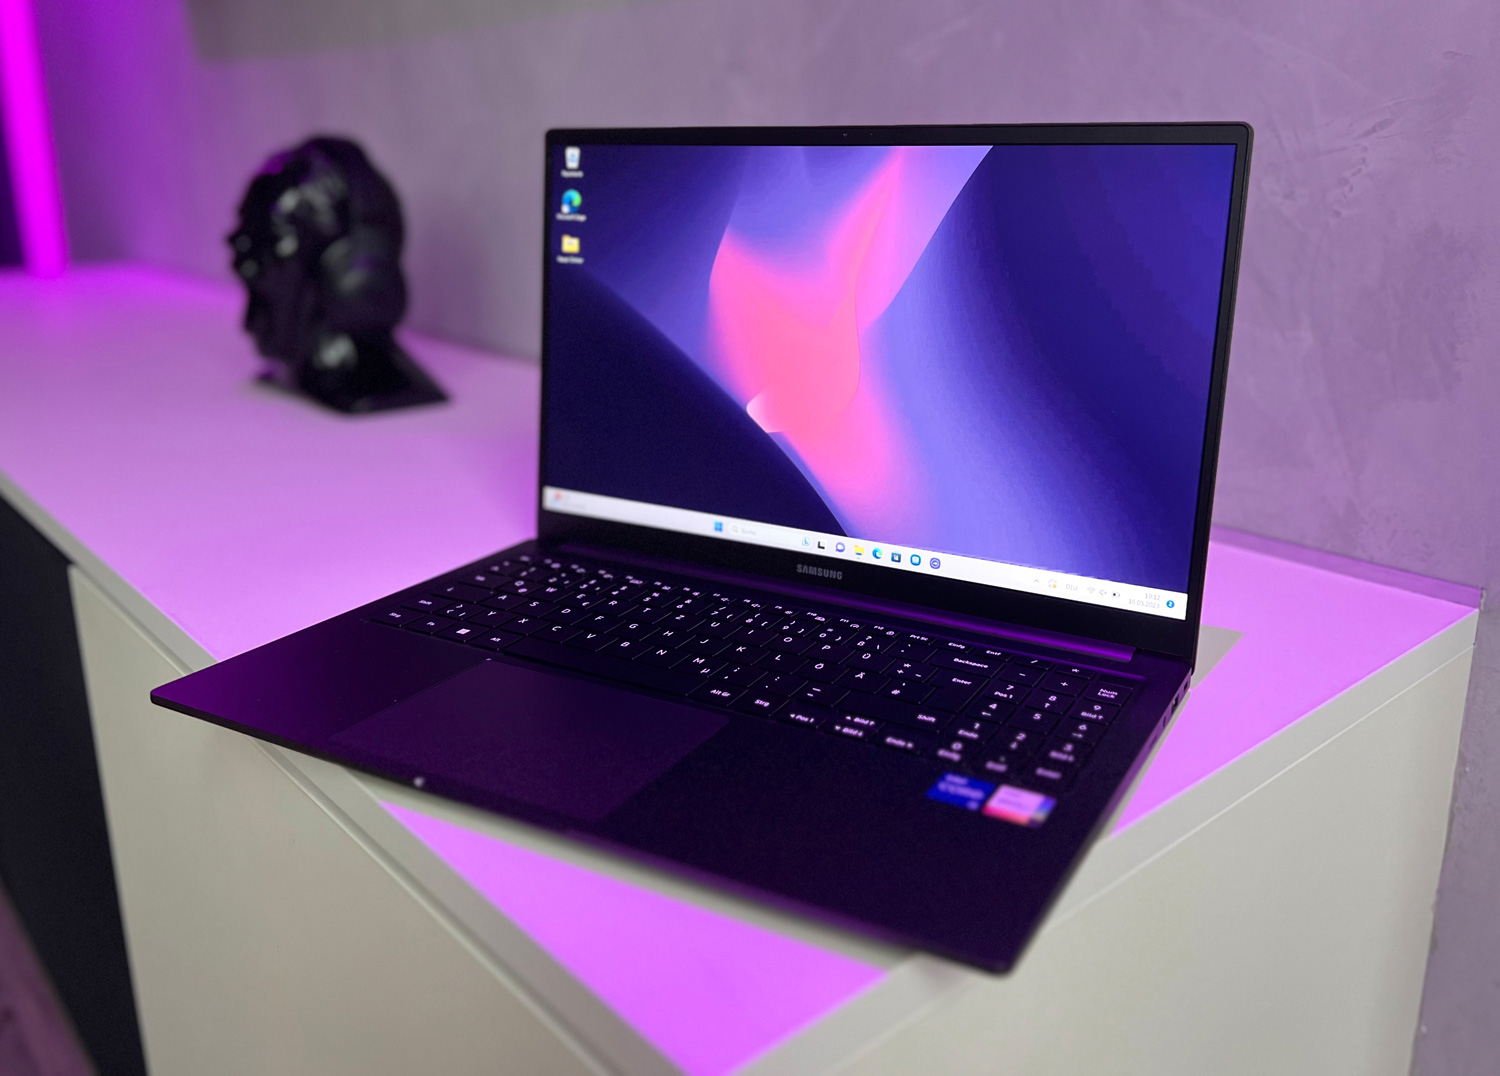 Samsung Galaxy Book 3 Ultra review: The laptop Samsung fans have been  waiting for